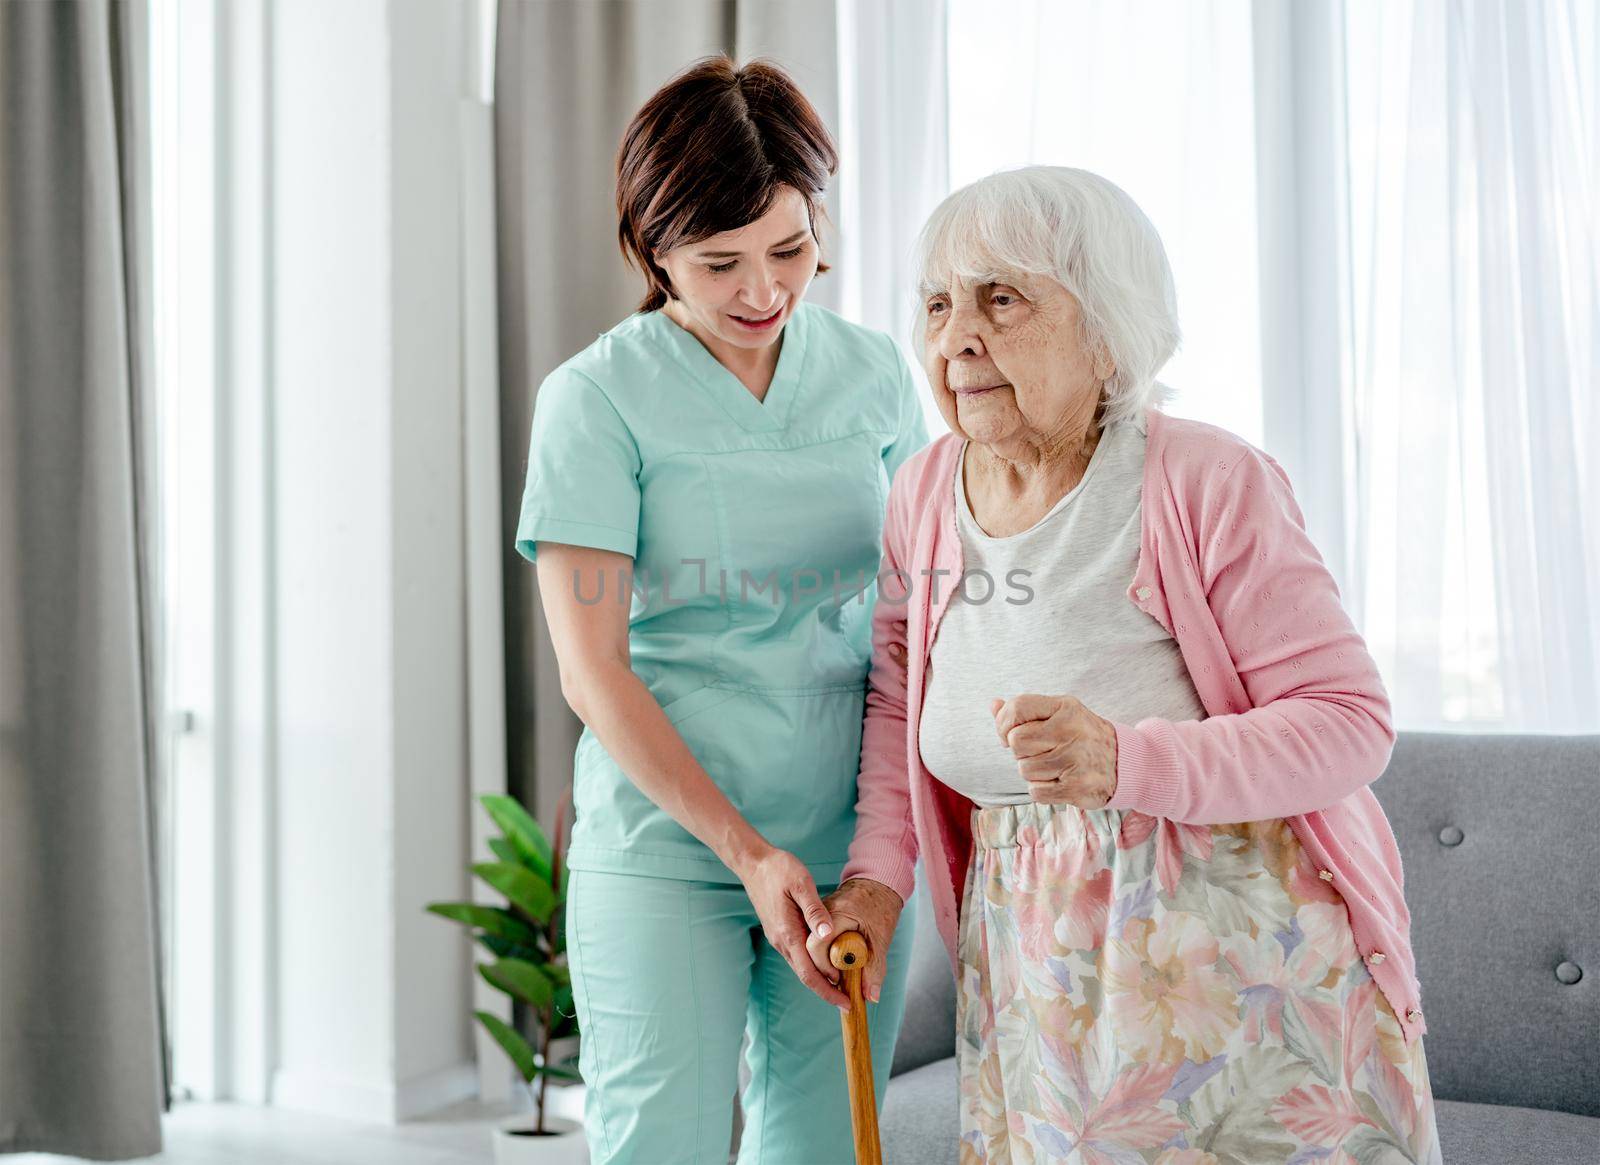 Young nurse helps elderly woman at home. Healthcare worker girl cares about senior female person indoors